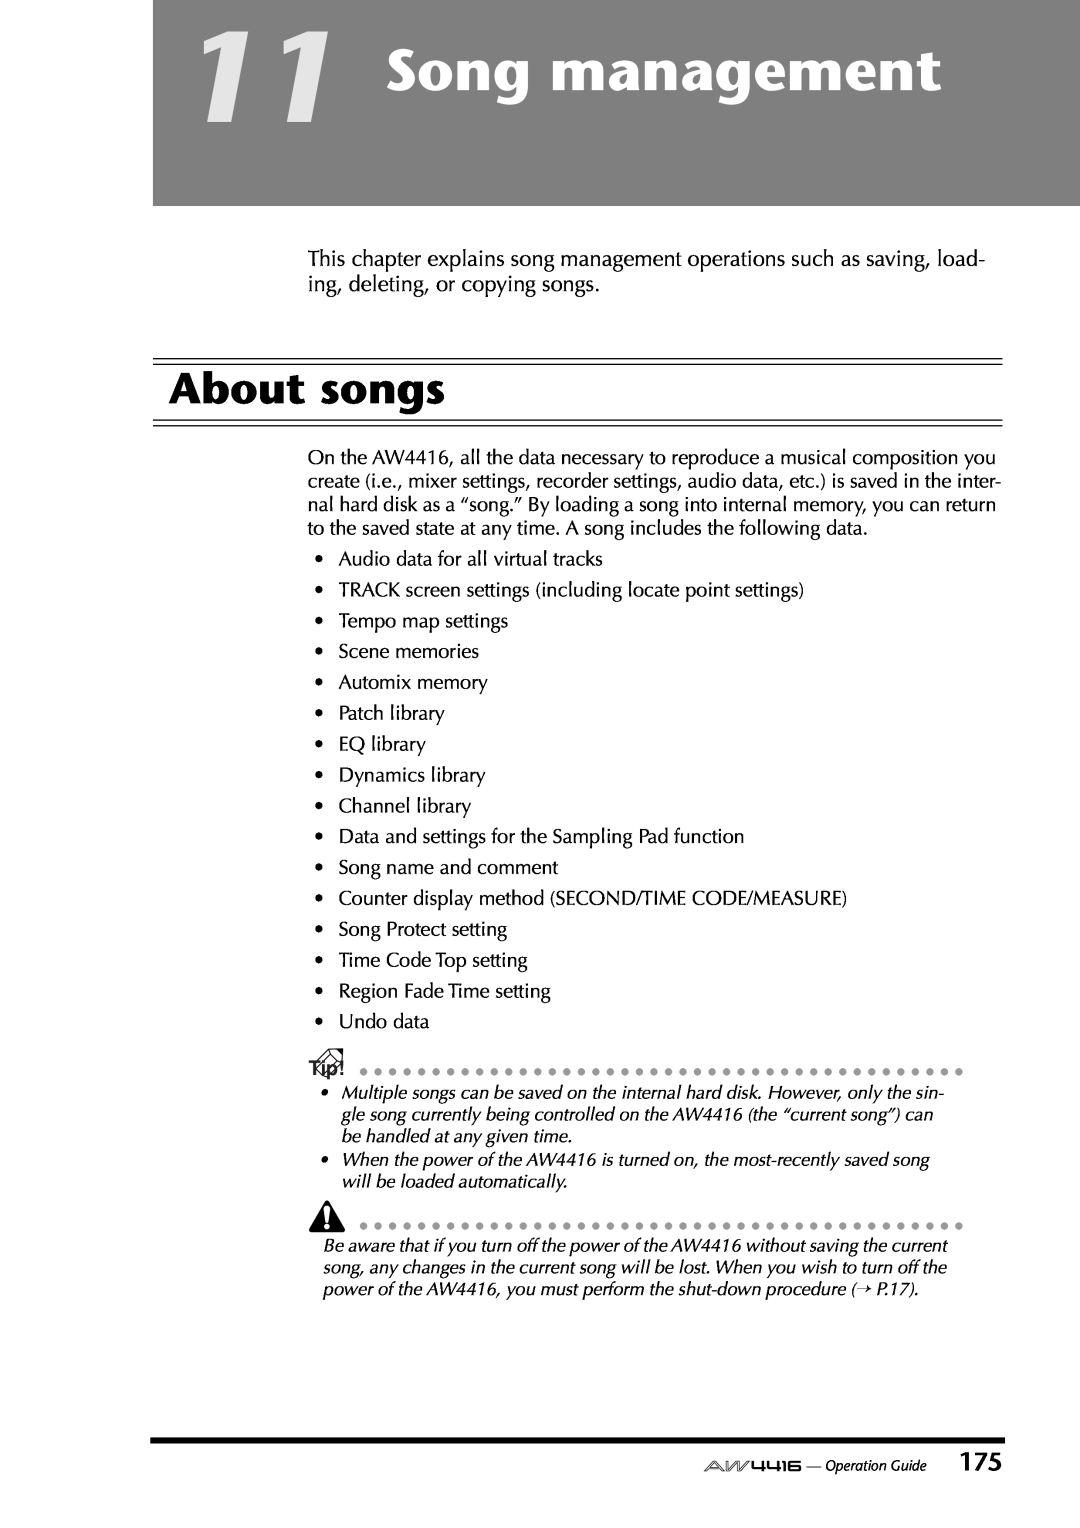 Yamaha AW4416 manual Song management, About songs 